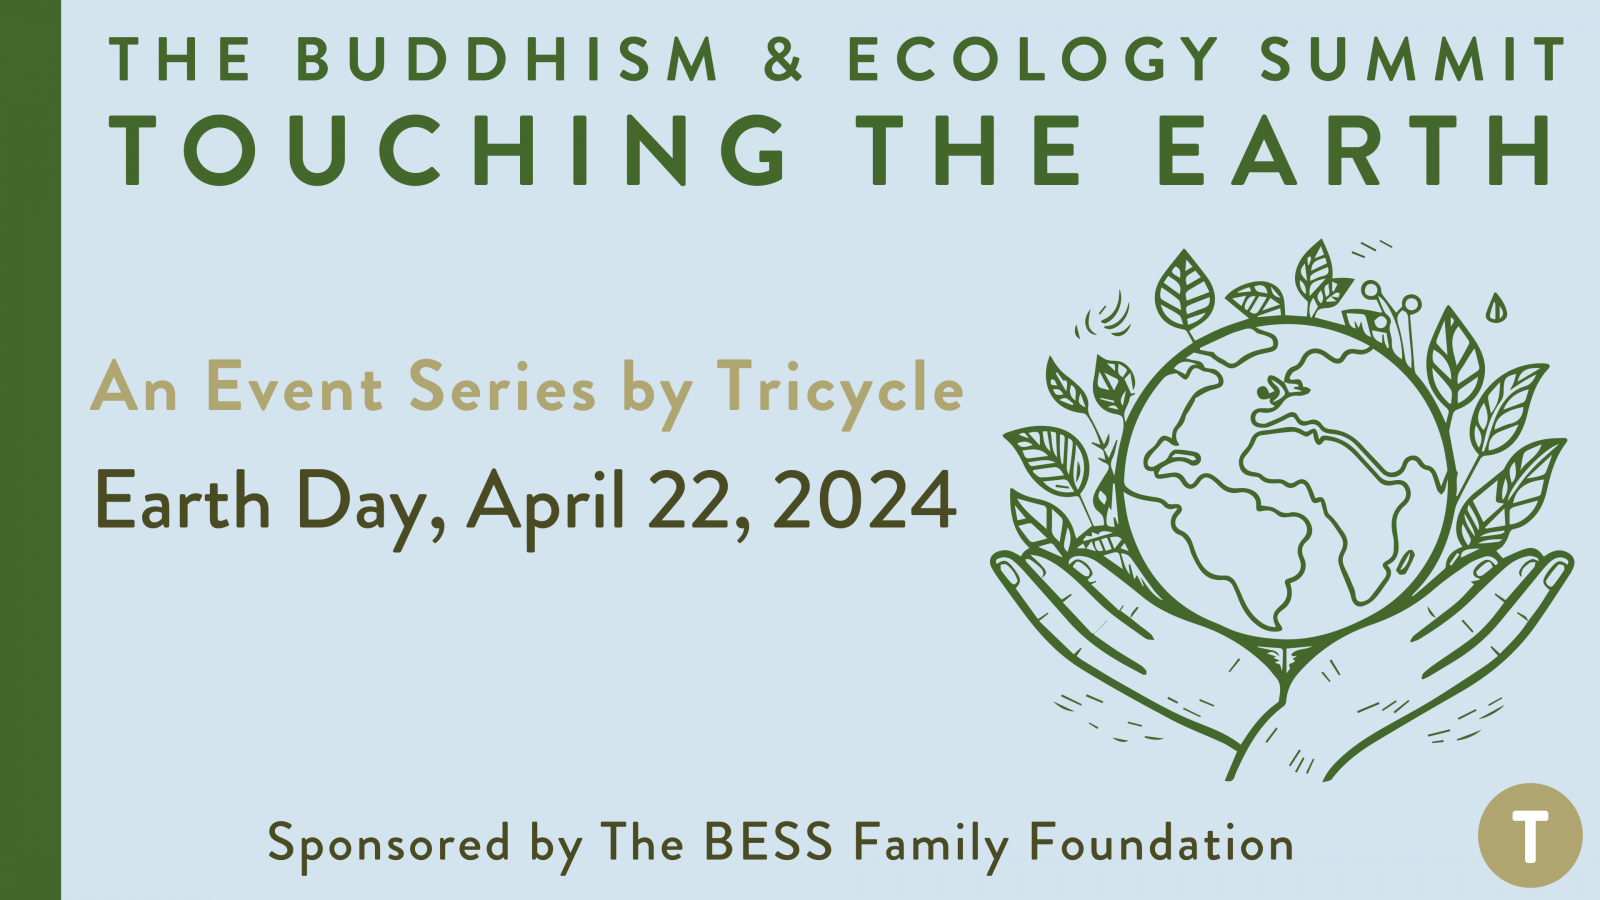 The Buddhism & Ecology Summit: Touching the Earth. An Event Series by Tricycle, Earth Day, April 22, 2024. Sponsored by the BESS Family Foundation.